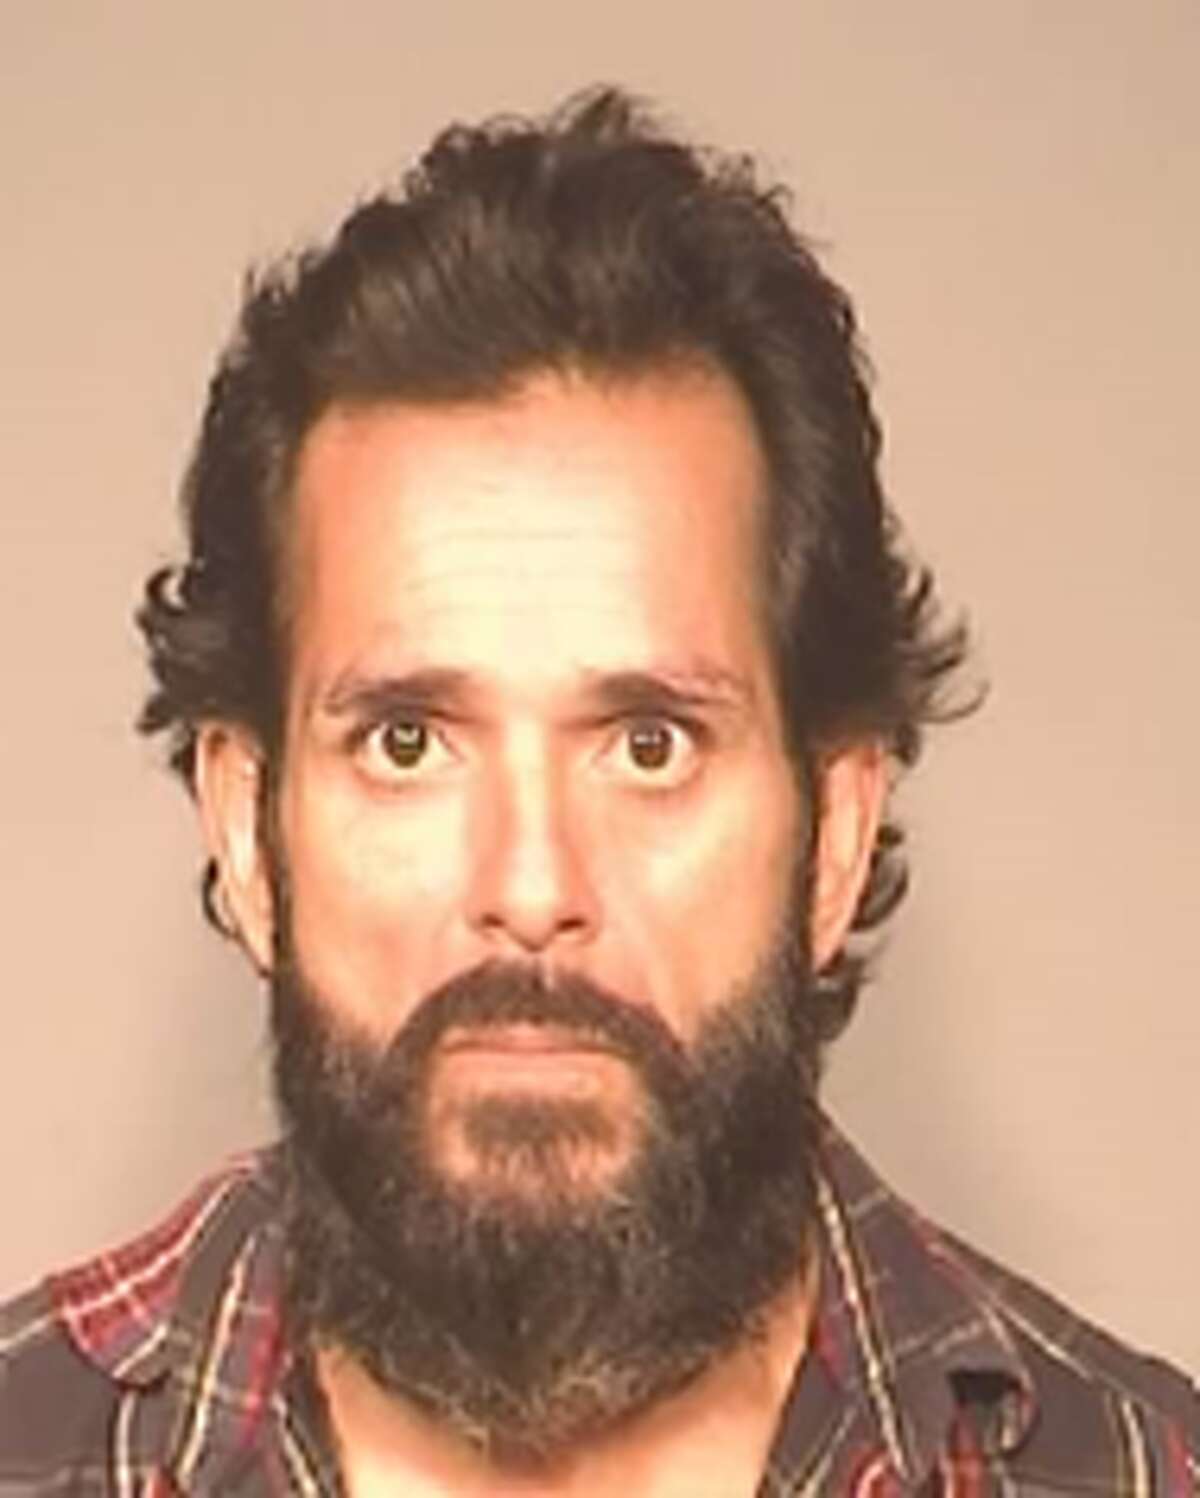 A man named Christopher Martinez was arrested after attempted to carjack a bus full of schoolchildren in Fresno.